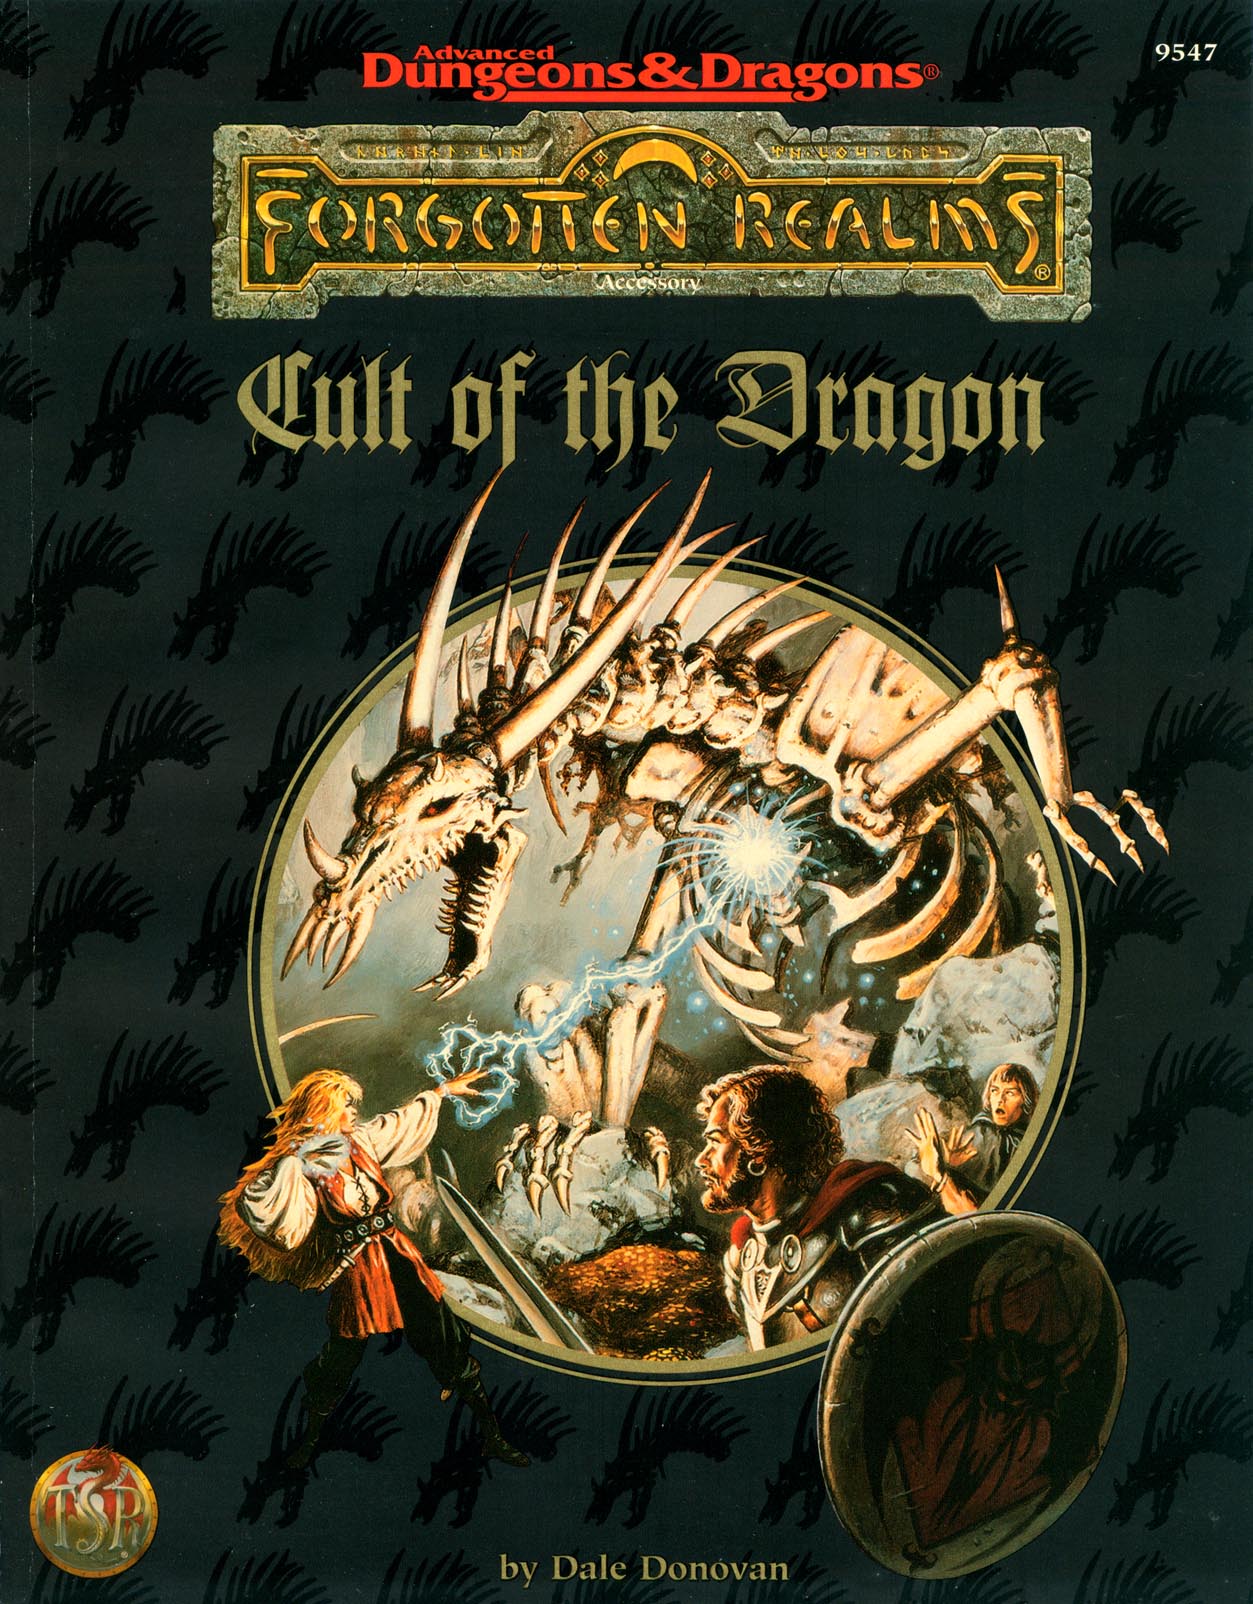 FOR11 Cult of the DragonCover art